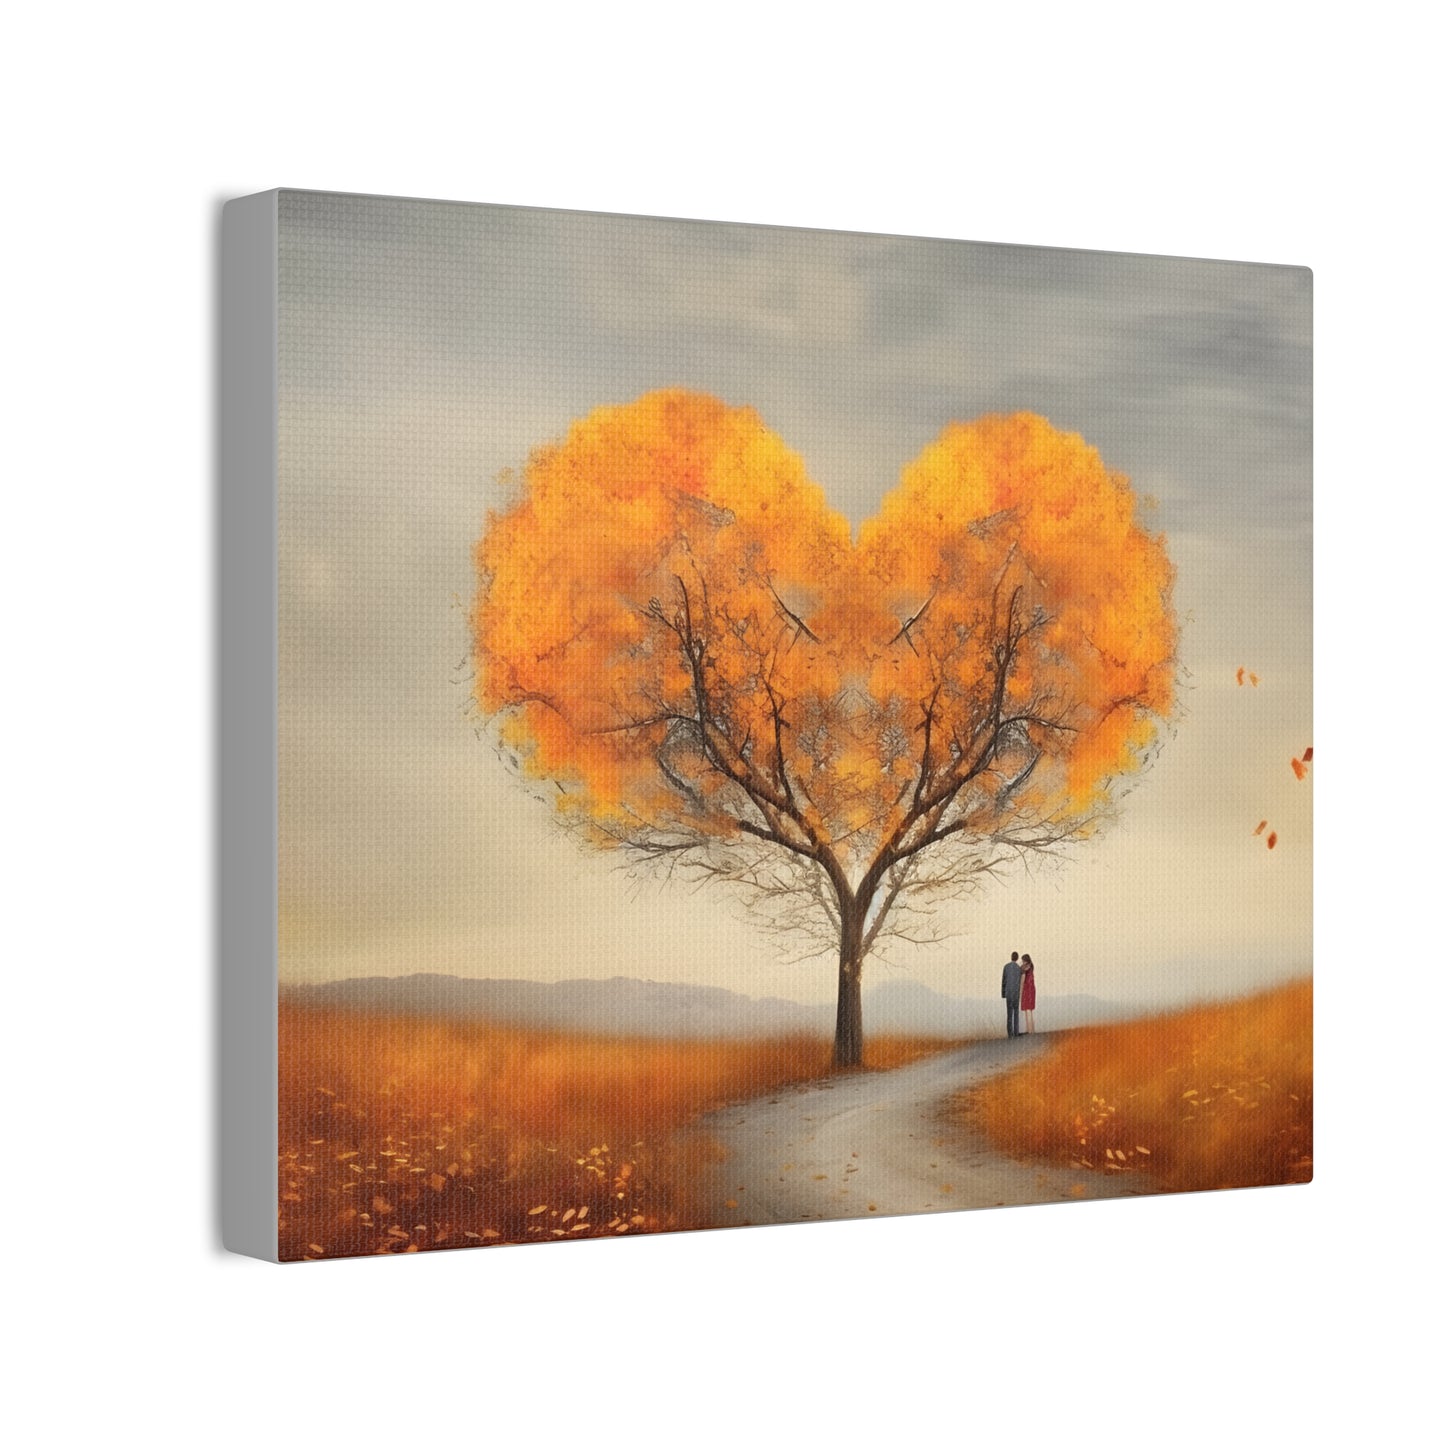 Landscape Of Heart Shaped Tree in Fall with two Lovers Canvas Stretched, 0.75" - CosmicDeva